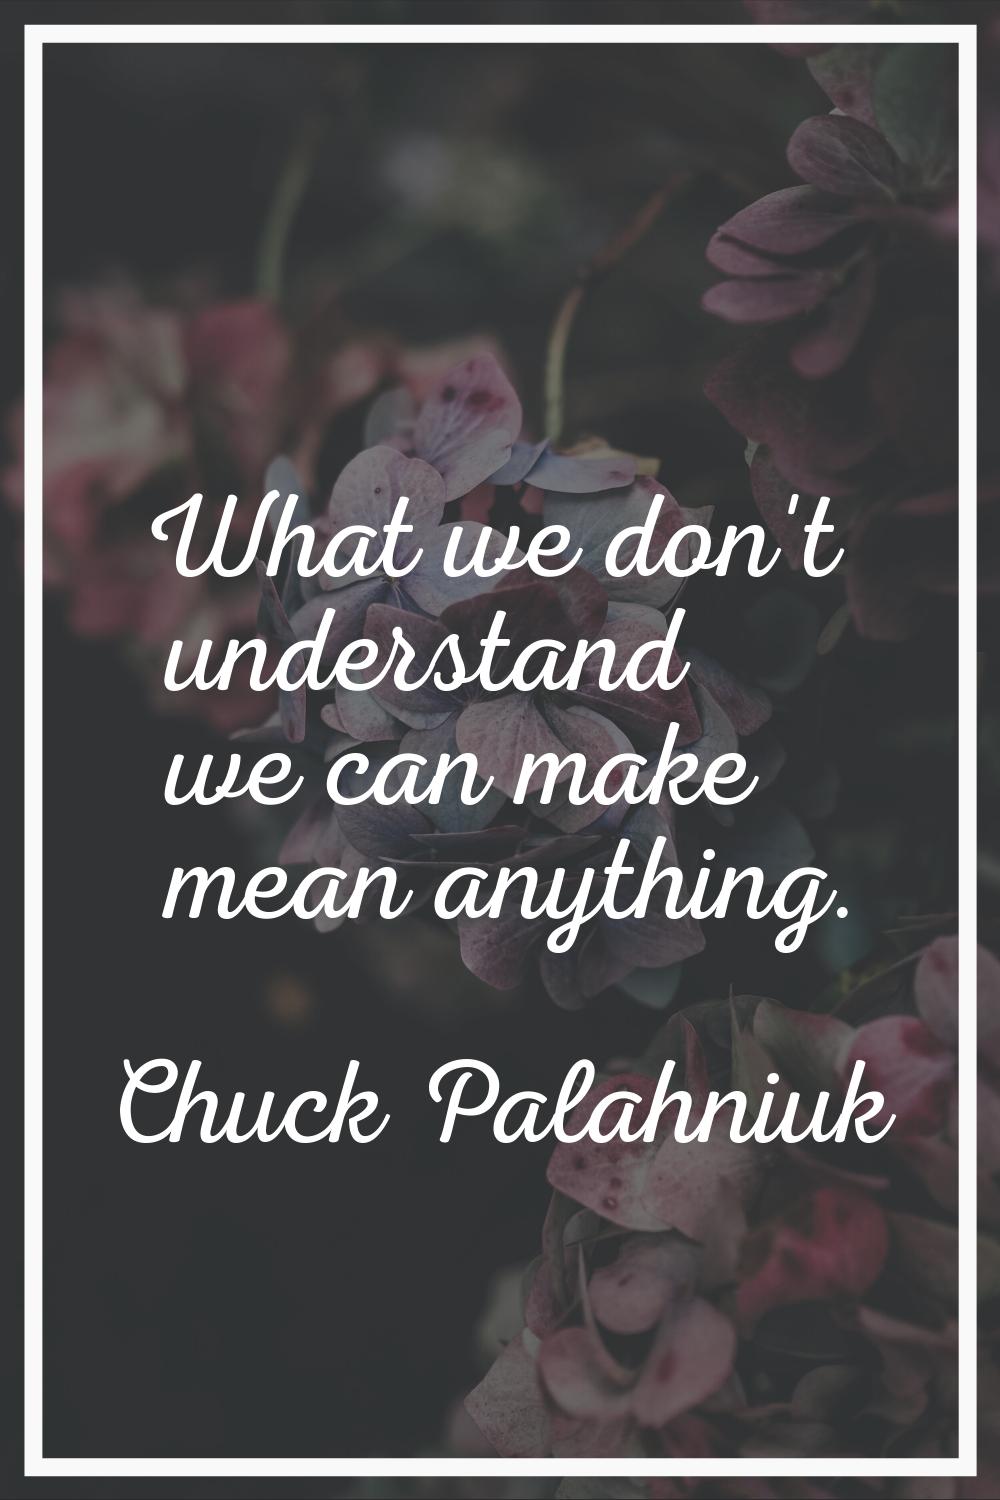 What we don't understand we can make mean anything.